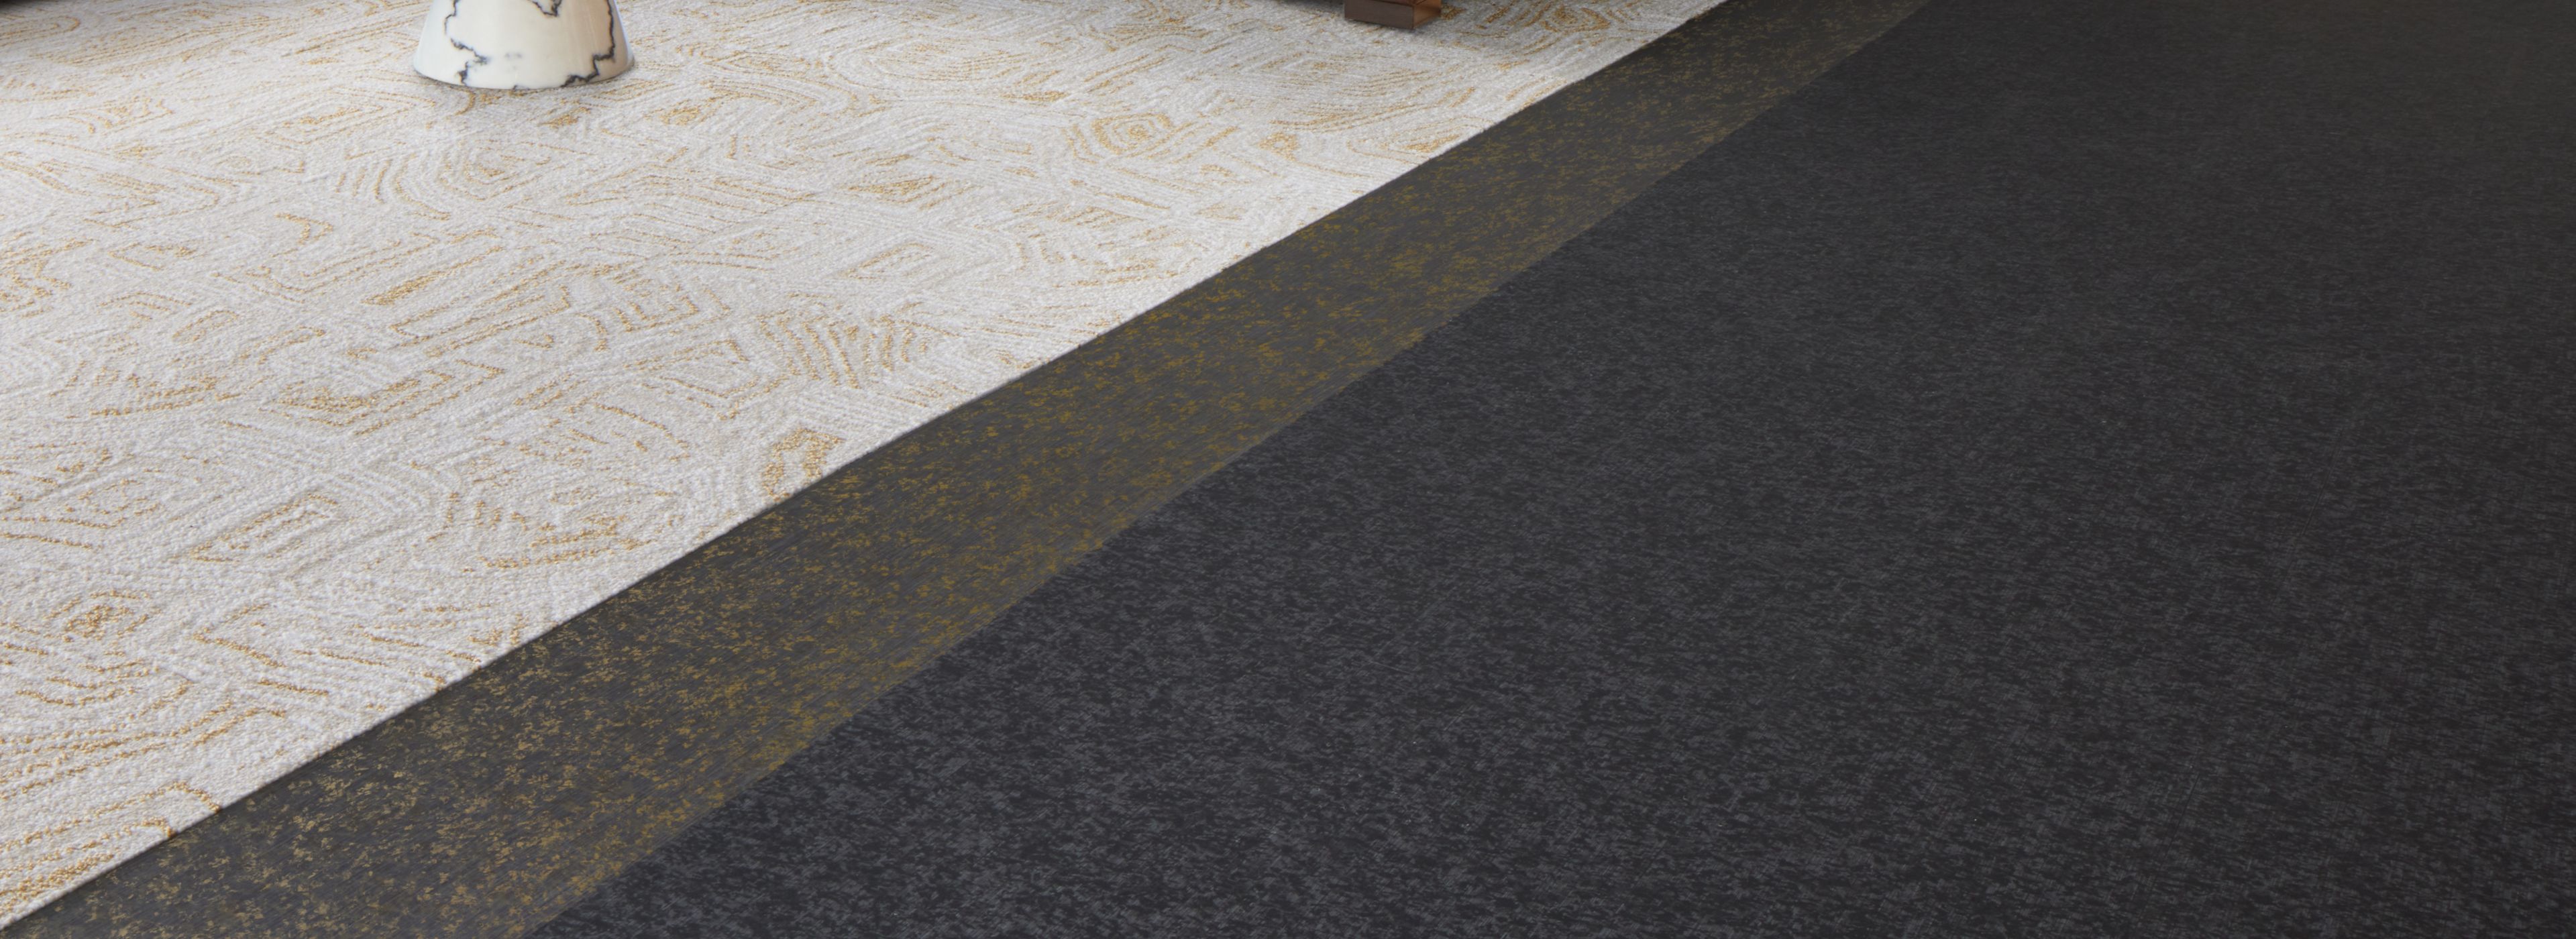 Interface Silk Age LVT with FLOR Anthracite carpet tile in lobby imagen número 1